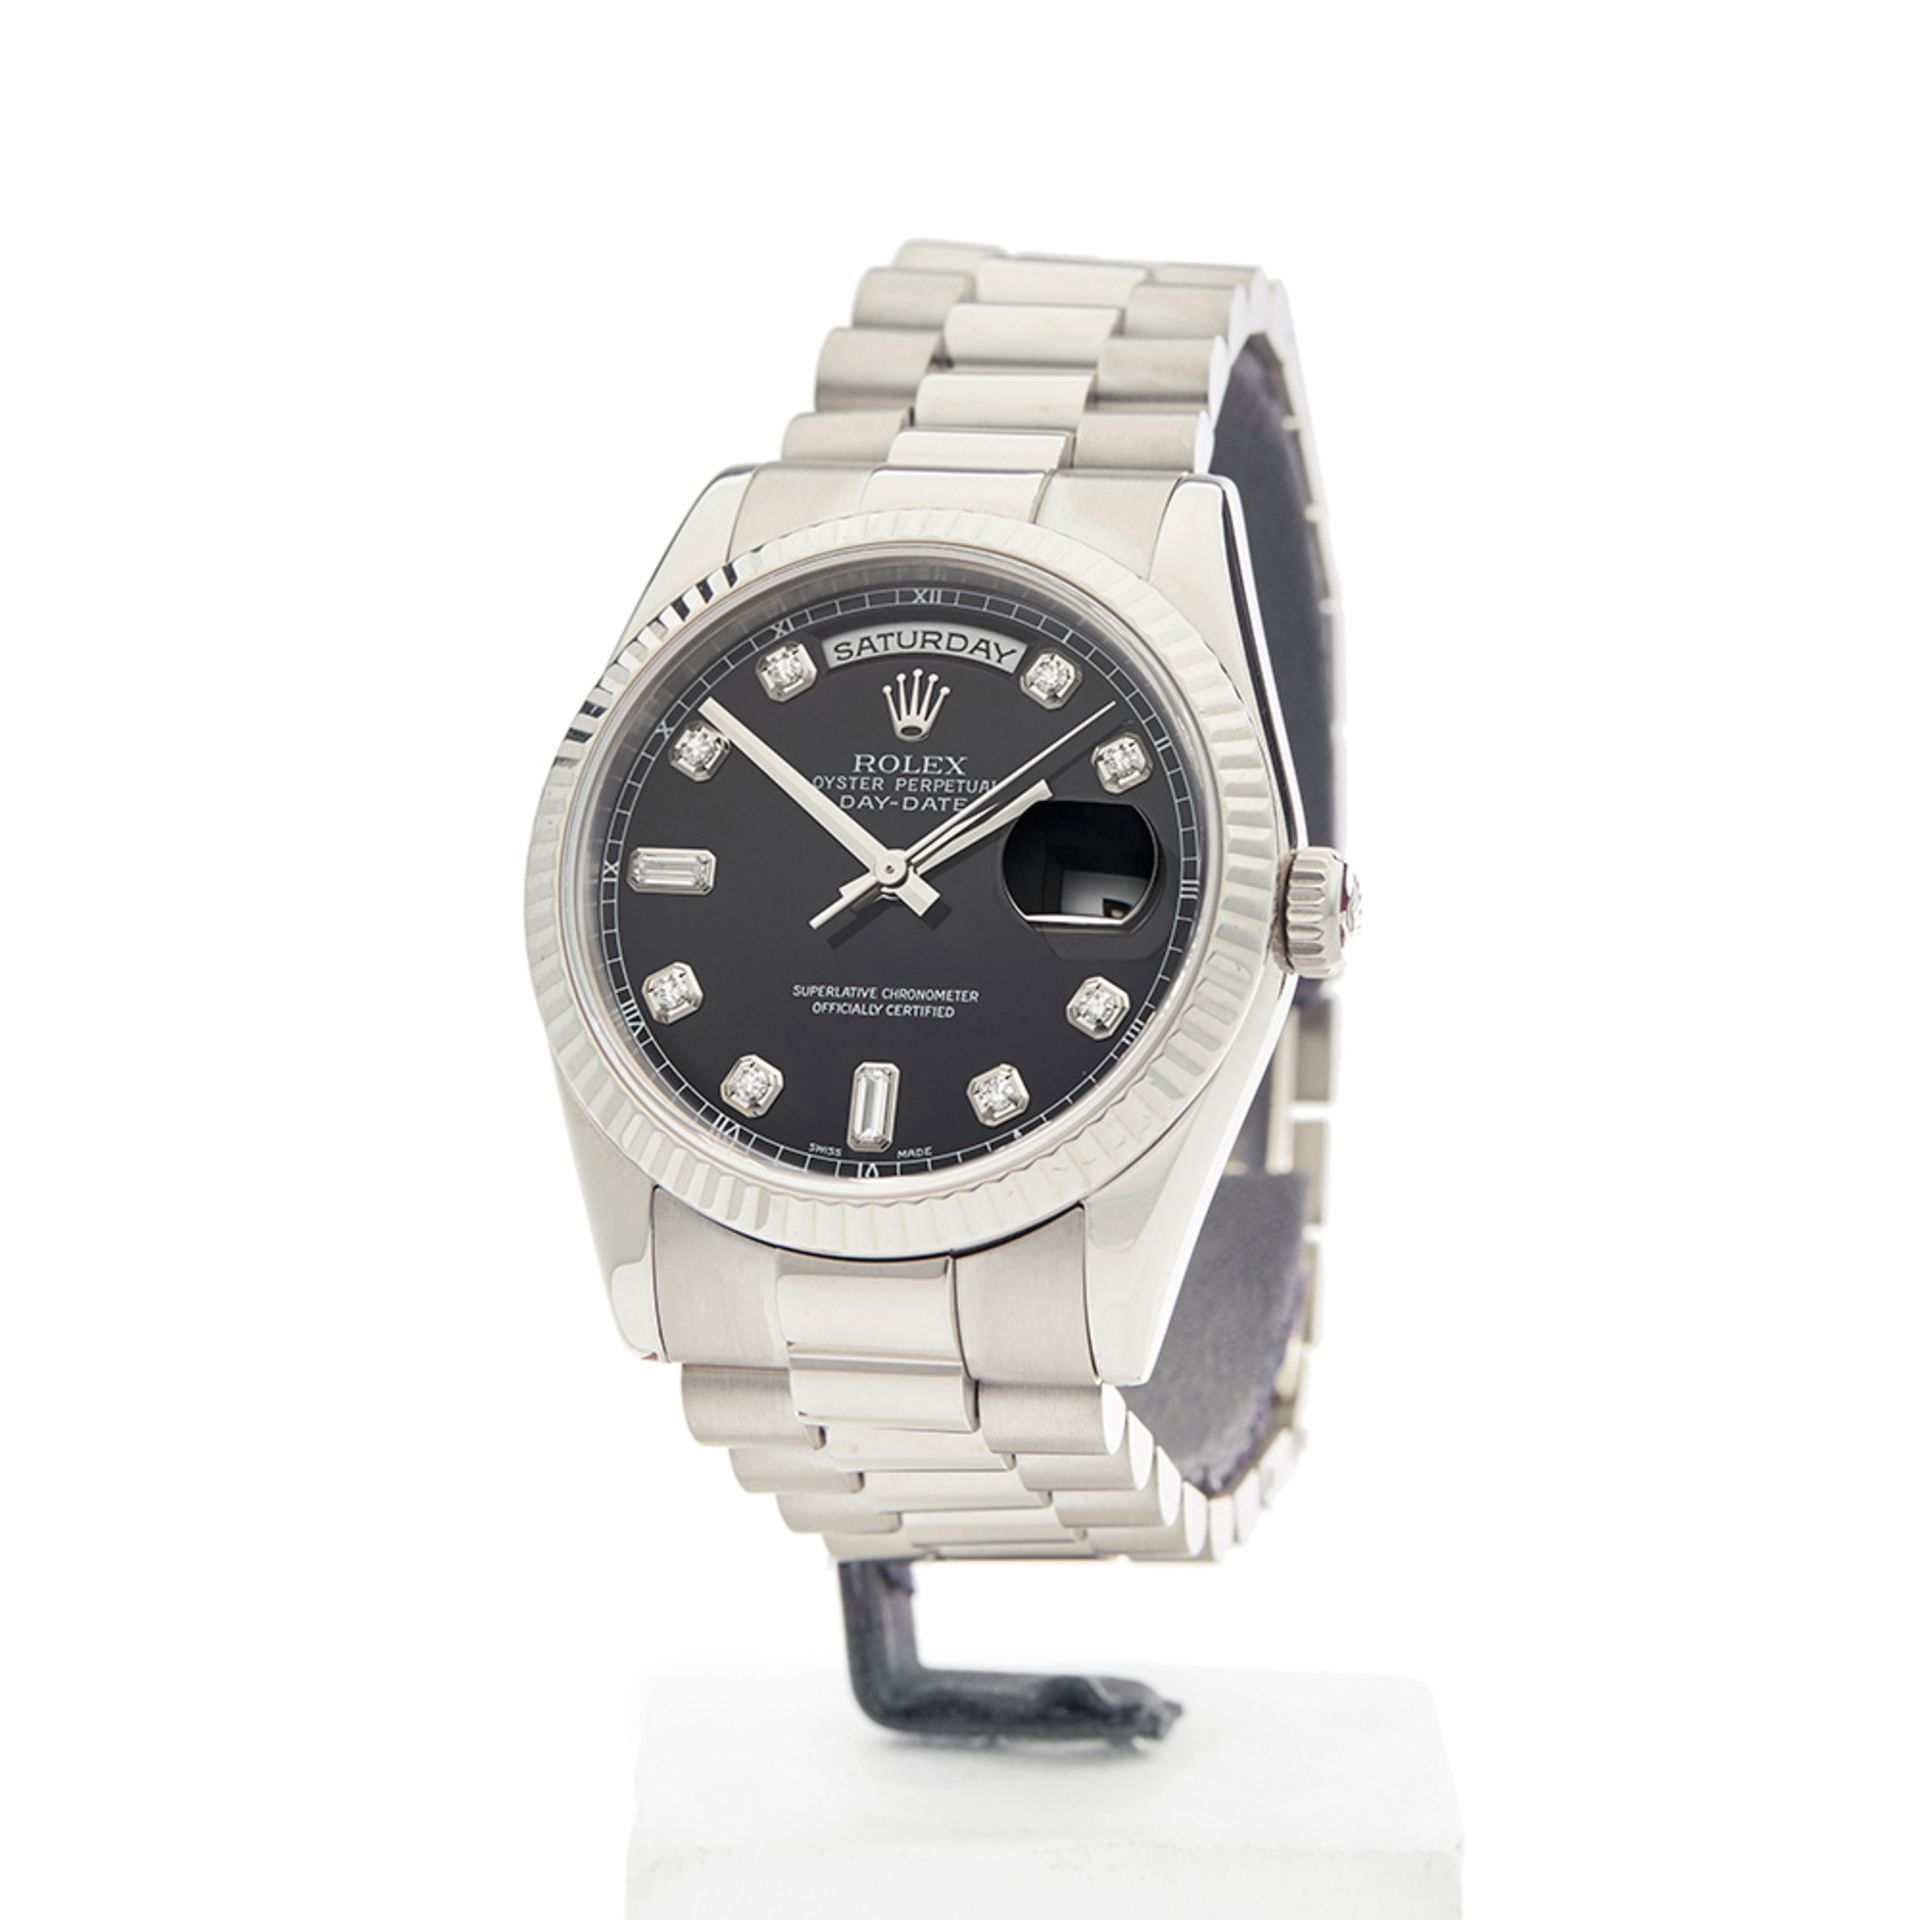 Rolex Day-Date 36mm 18k White Gold - 118239 - Image 3 of 9